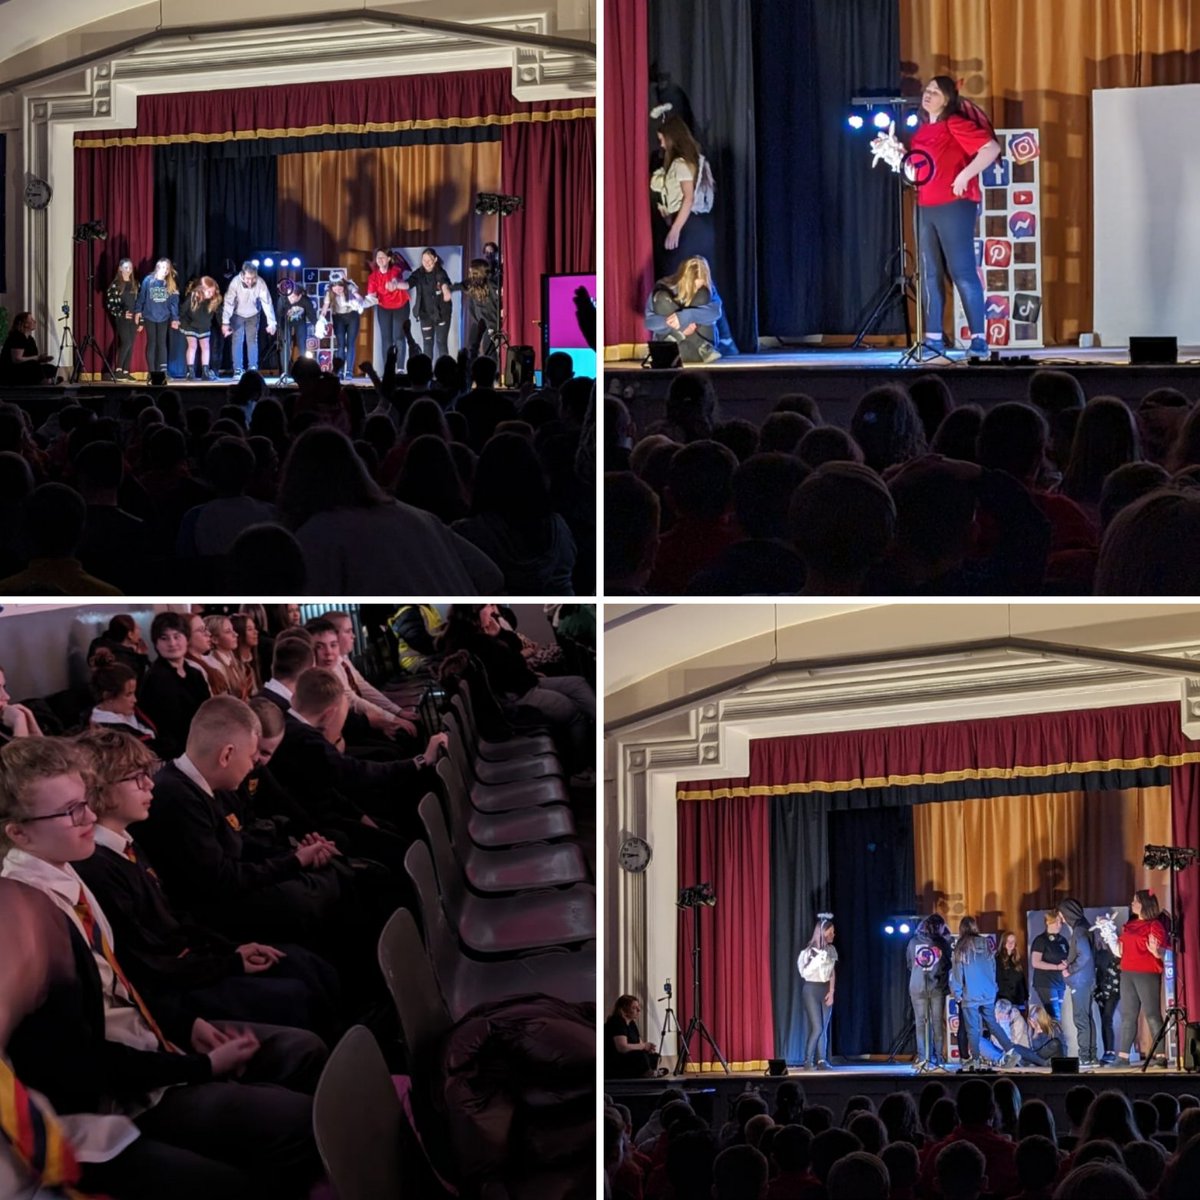 Today, our Year 7 Dyfodol class was treated to an inspired performance from drama students in Year 9&10. Huge thanks to Mrs. Jones and the drama department for the invite! 🎭 #BryntegExpressiveArts #BryntegDrama @BryntegSchool